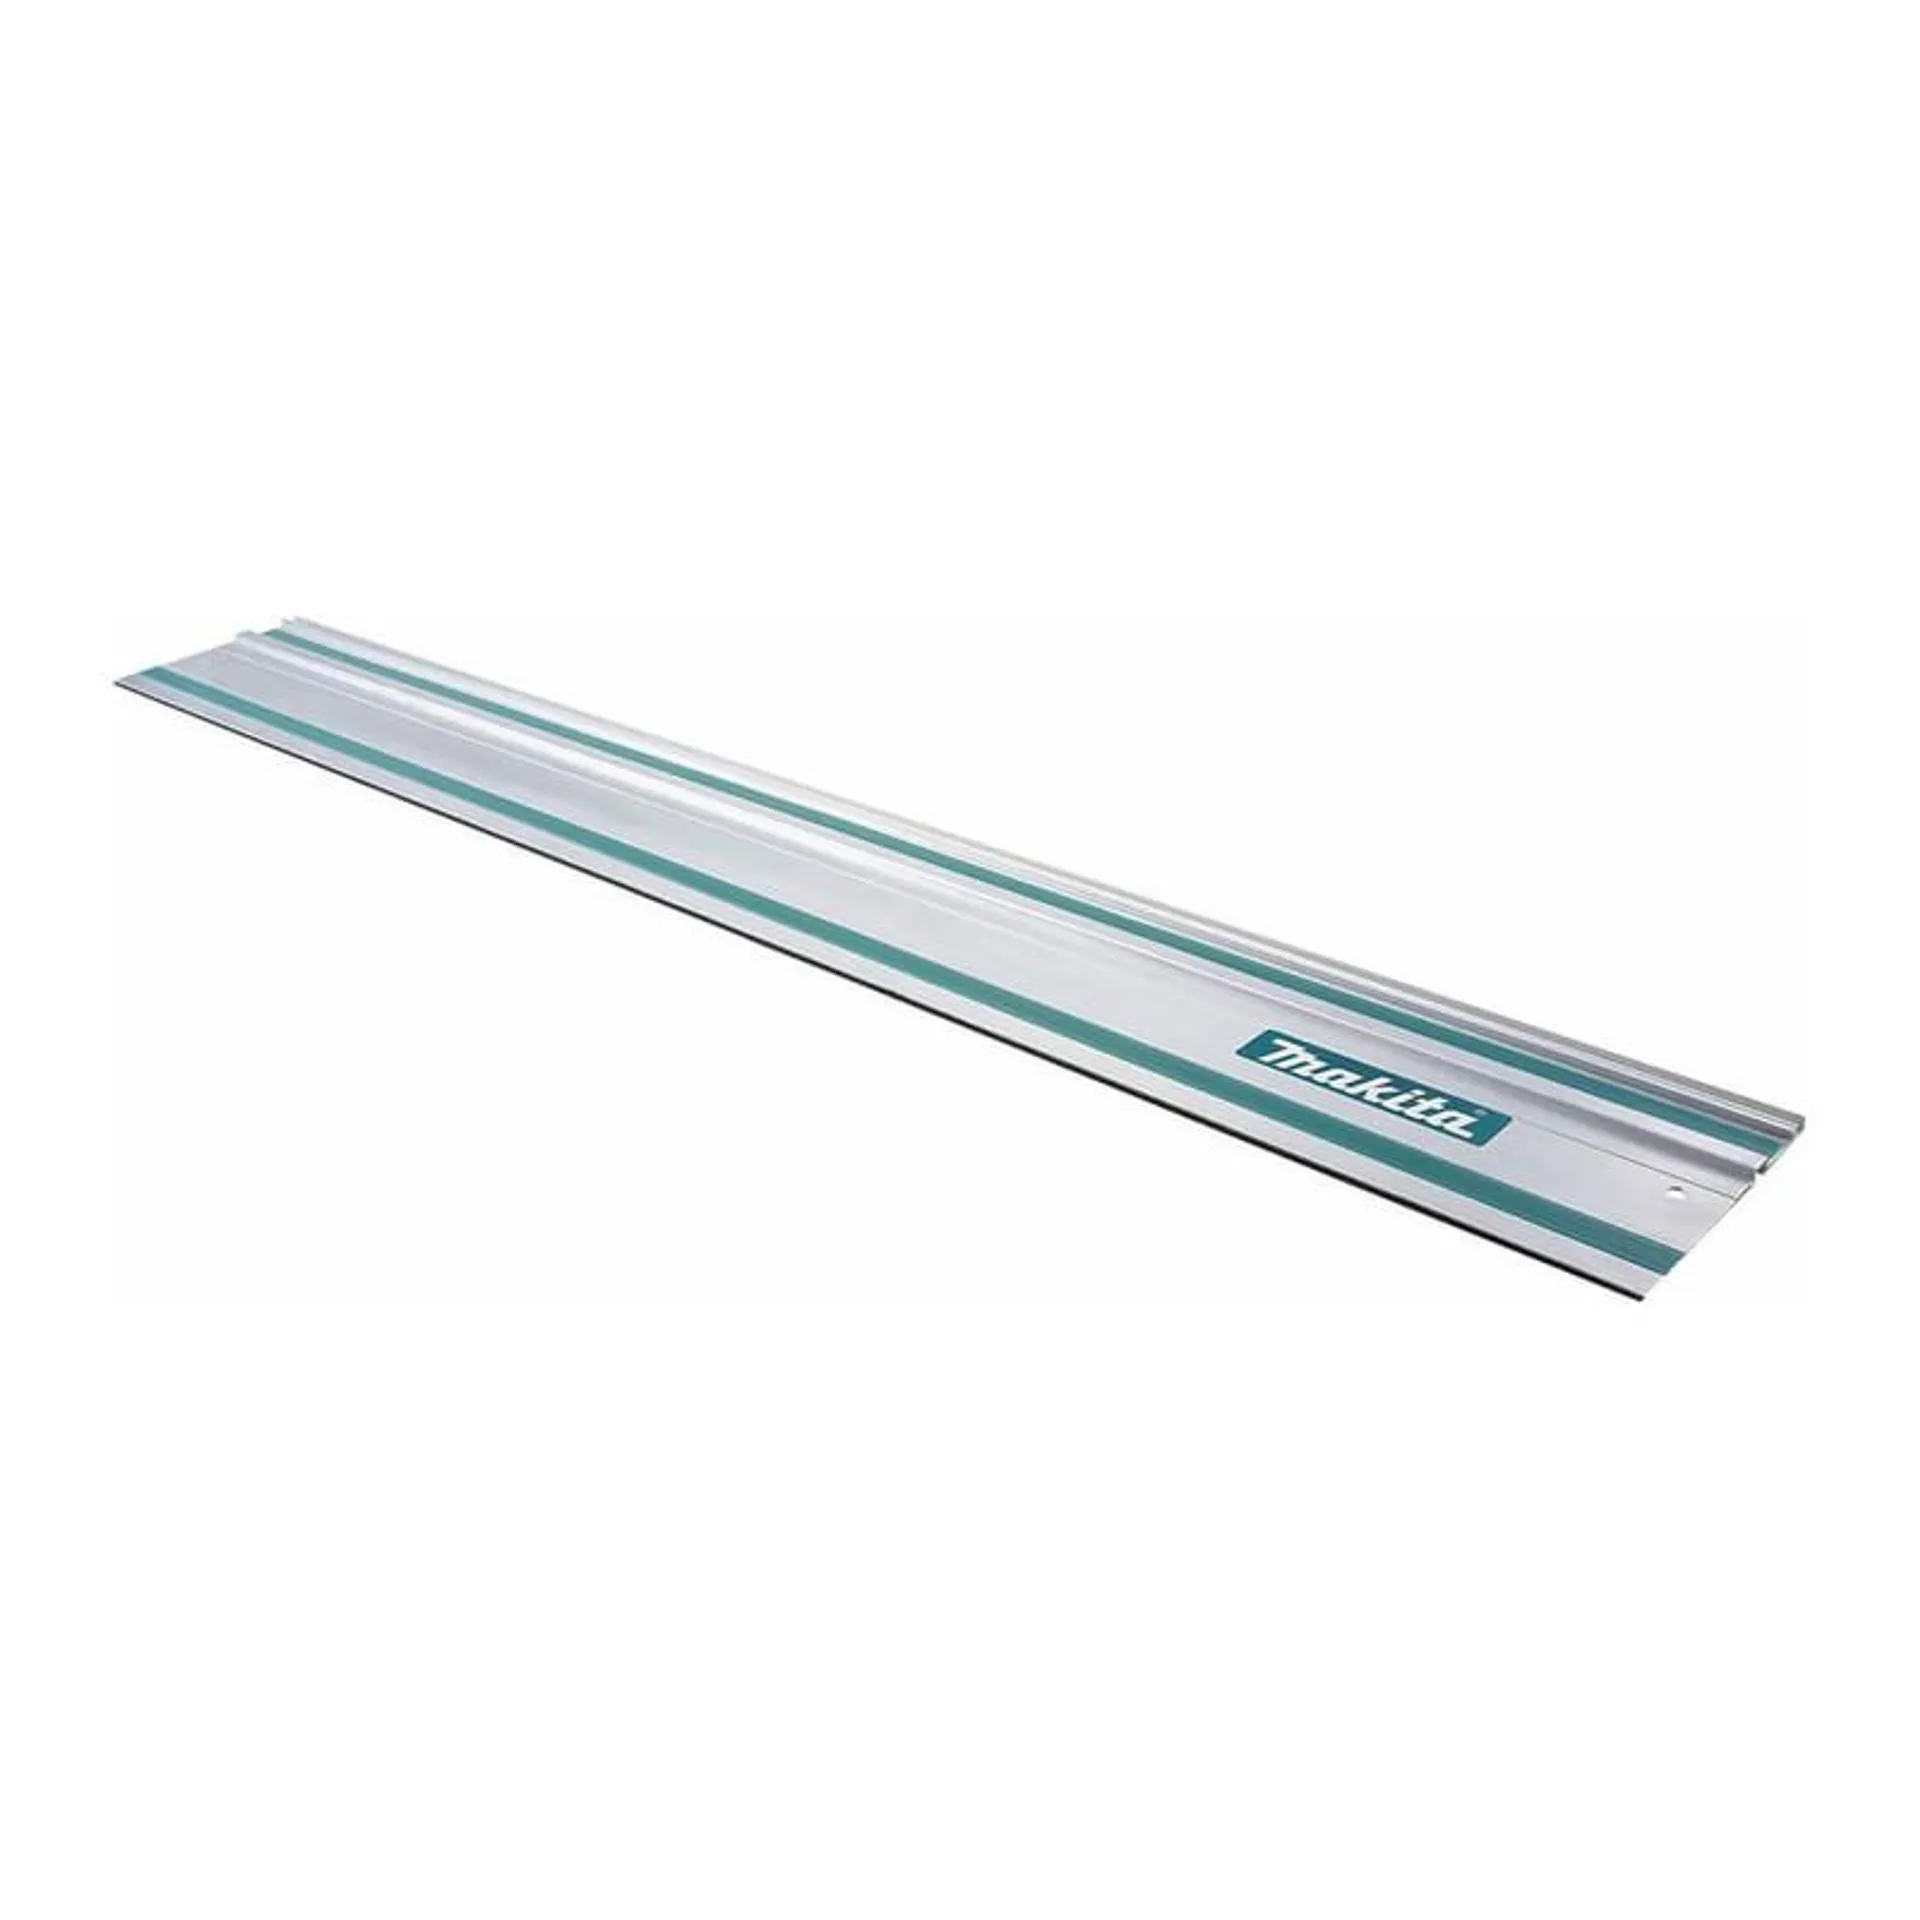 GUIDE RAIL 75IN. /1900MM FOR SP6000X1